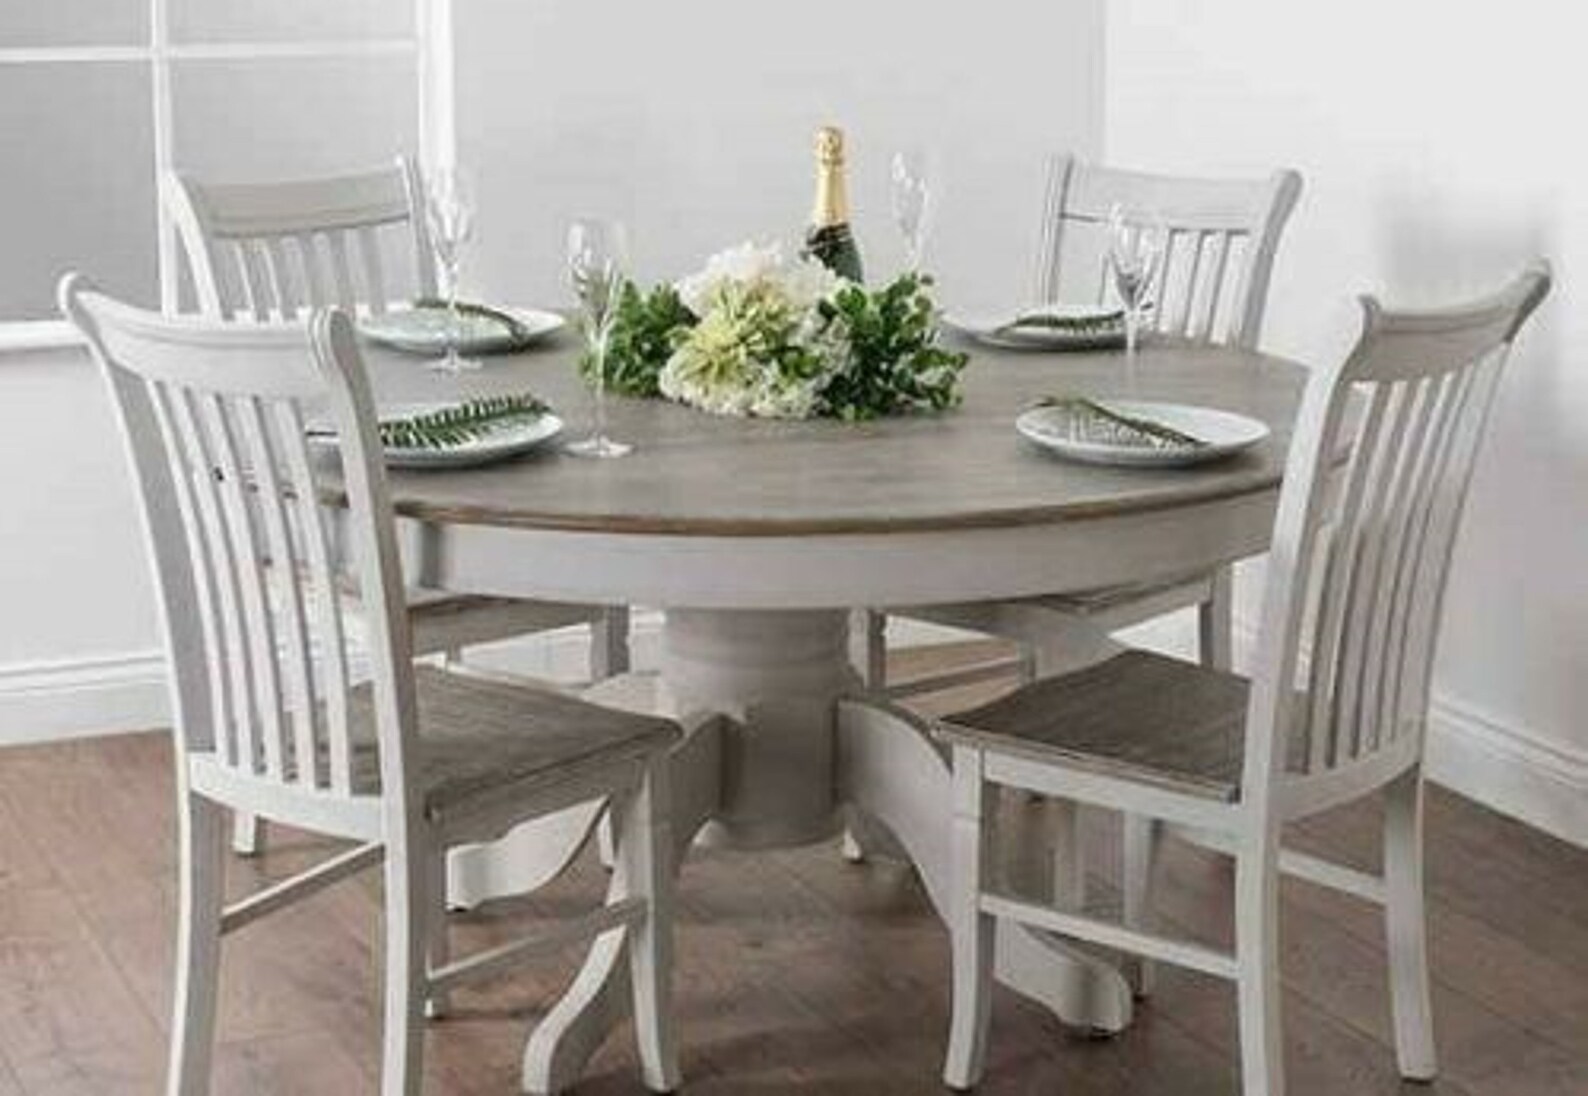 Shabby Chic Dining Room Table And Chairs Ebay